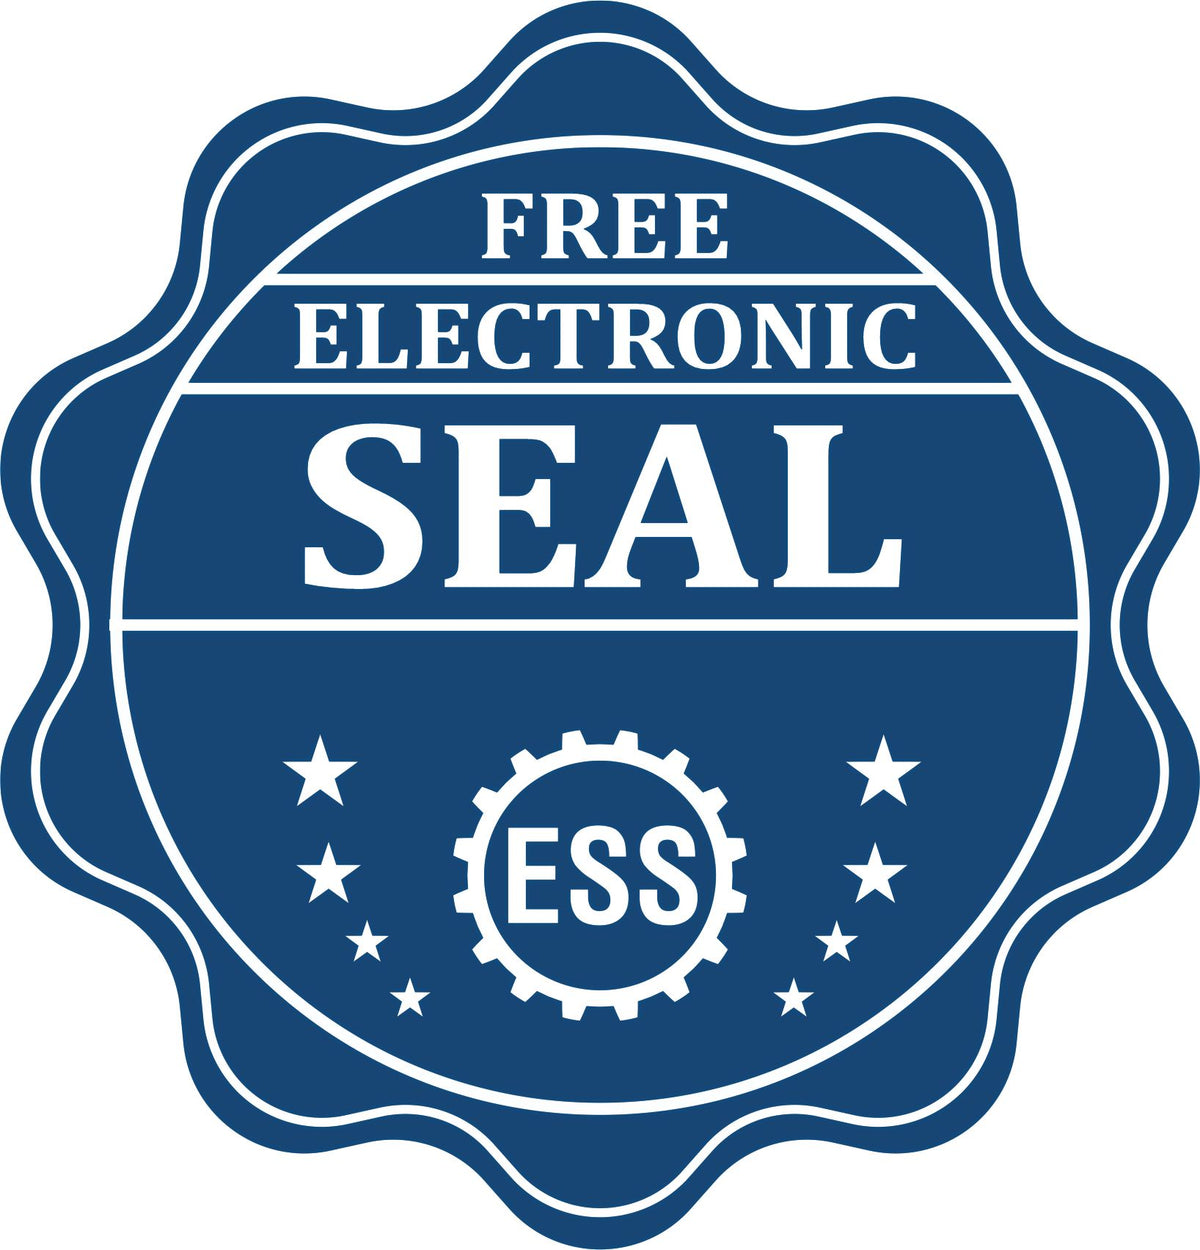 A badge showing a free electronic seal for the Hybrid Maine Land Surveyor Seal with stars and the ESS gear on the emblem.